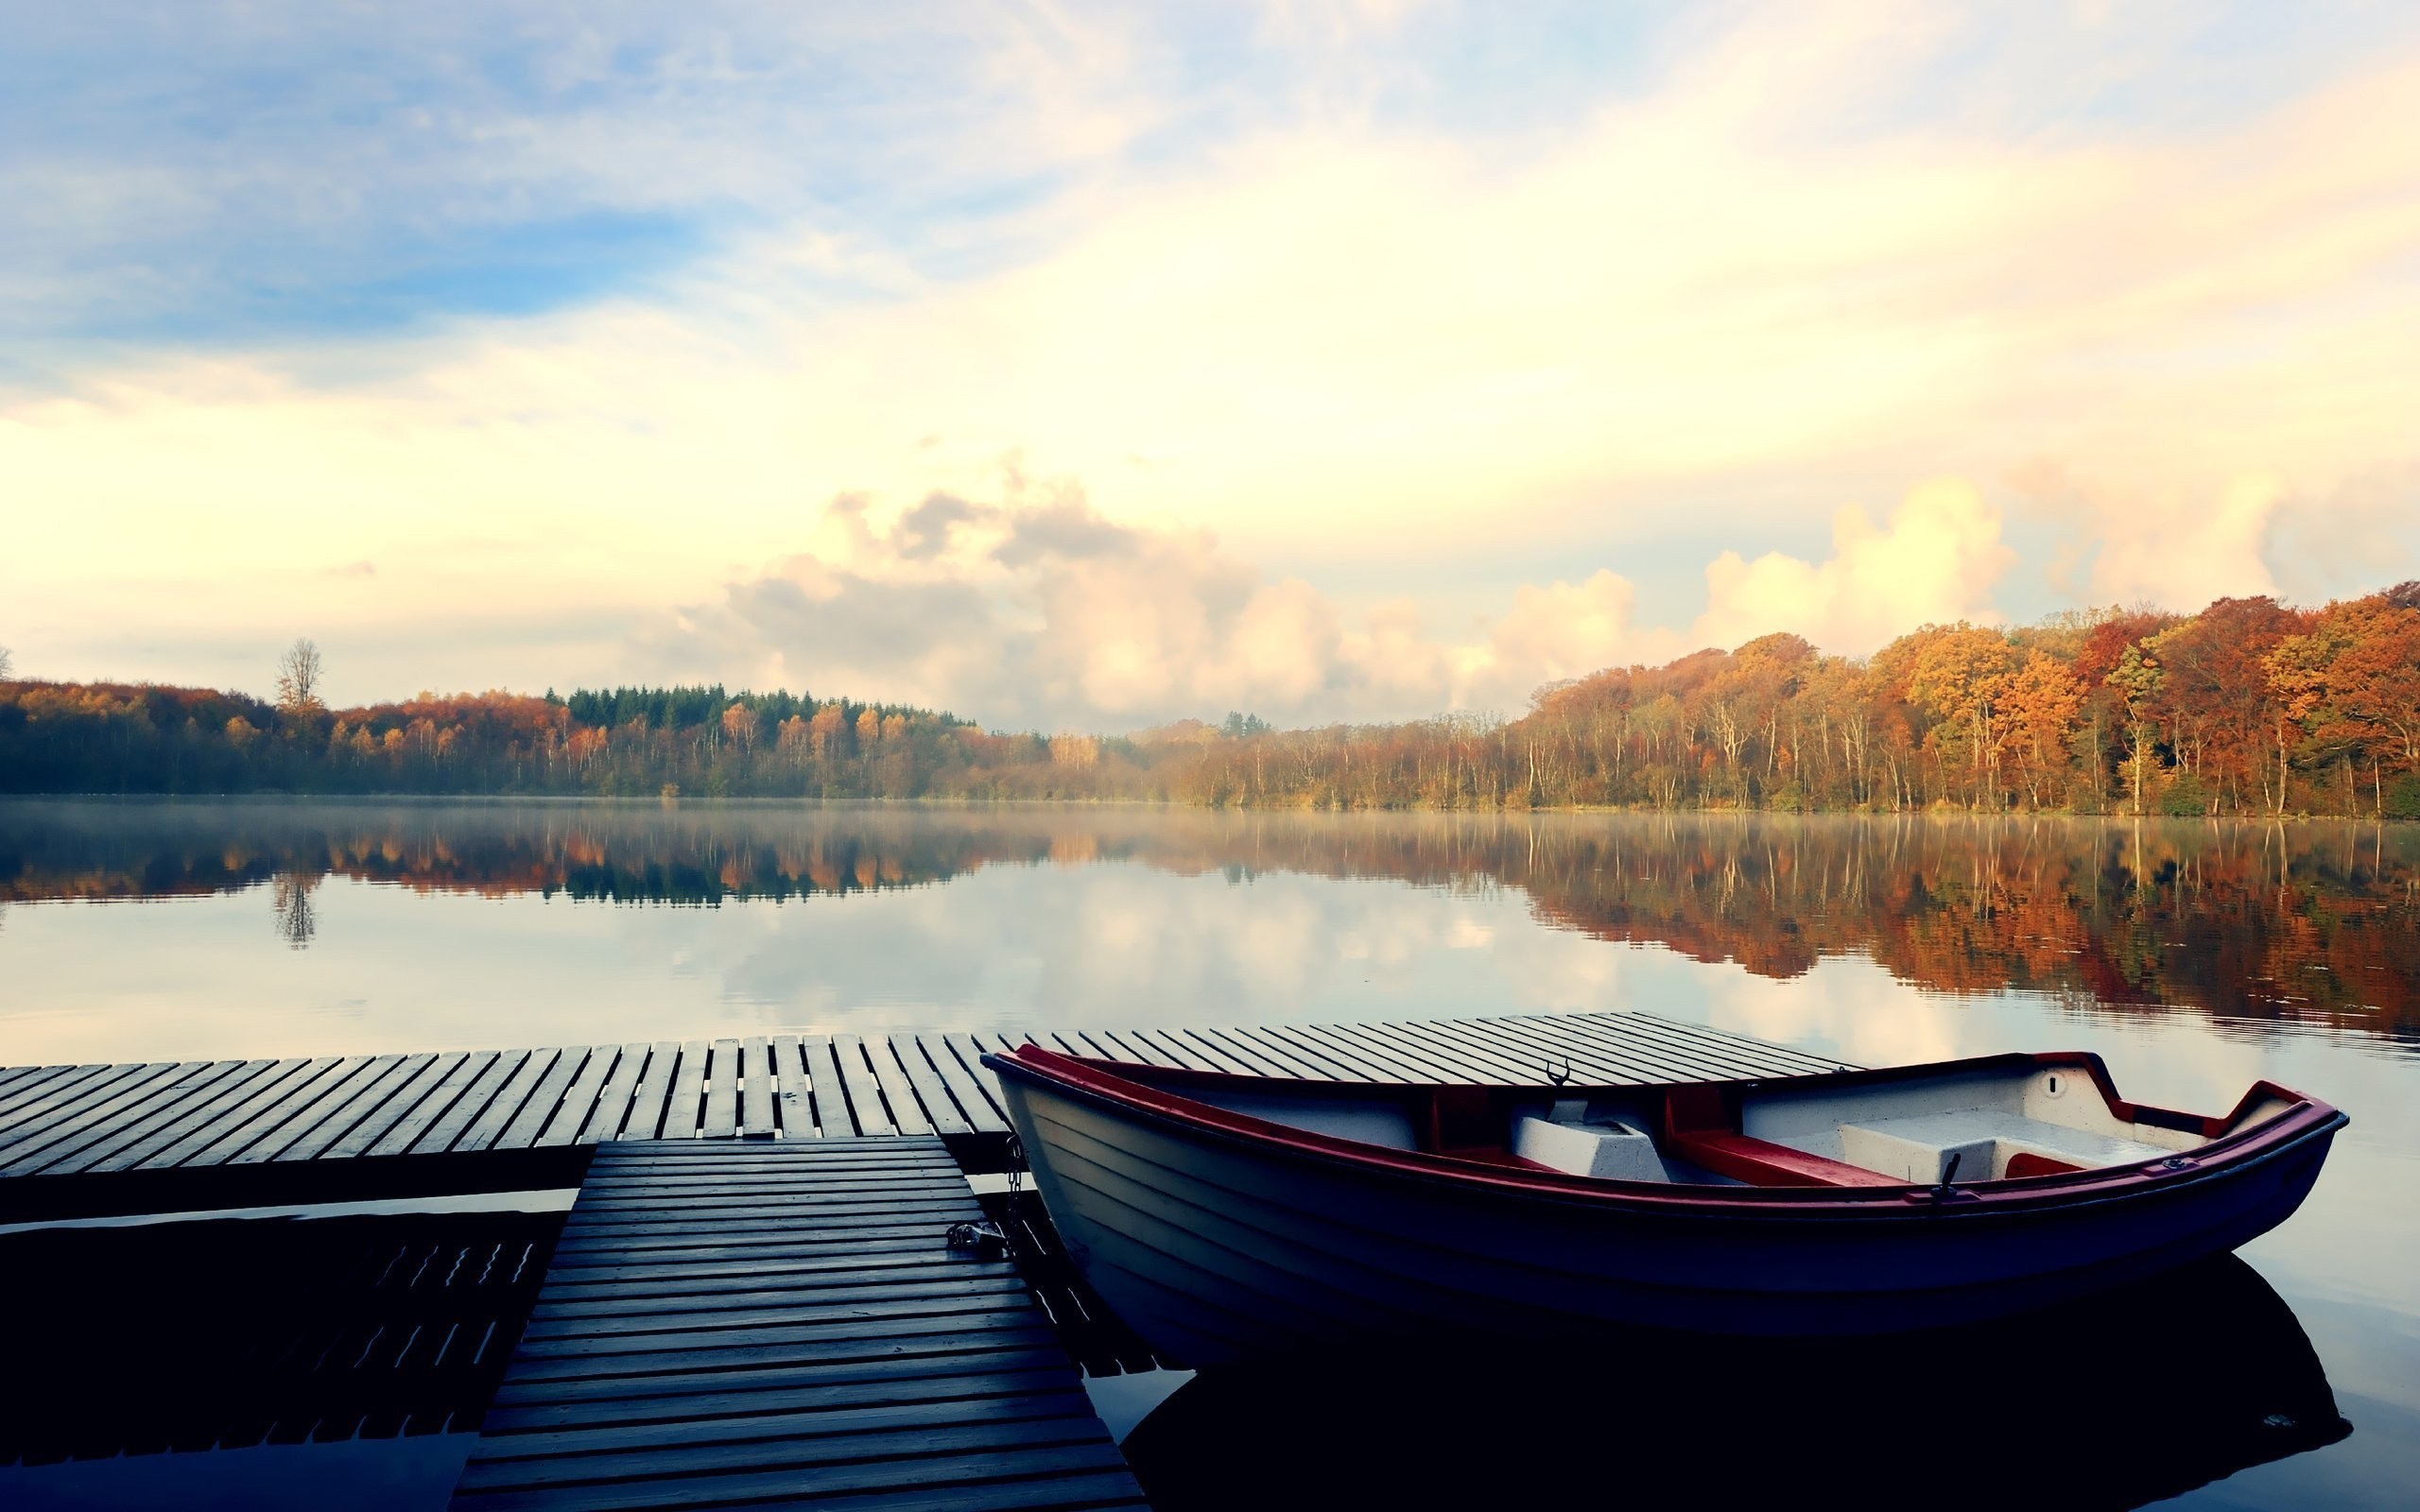 General 2560x1600 nature boat pier lake clouds fall trees forest calm waters vehicle landscape